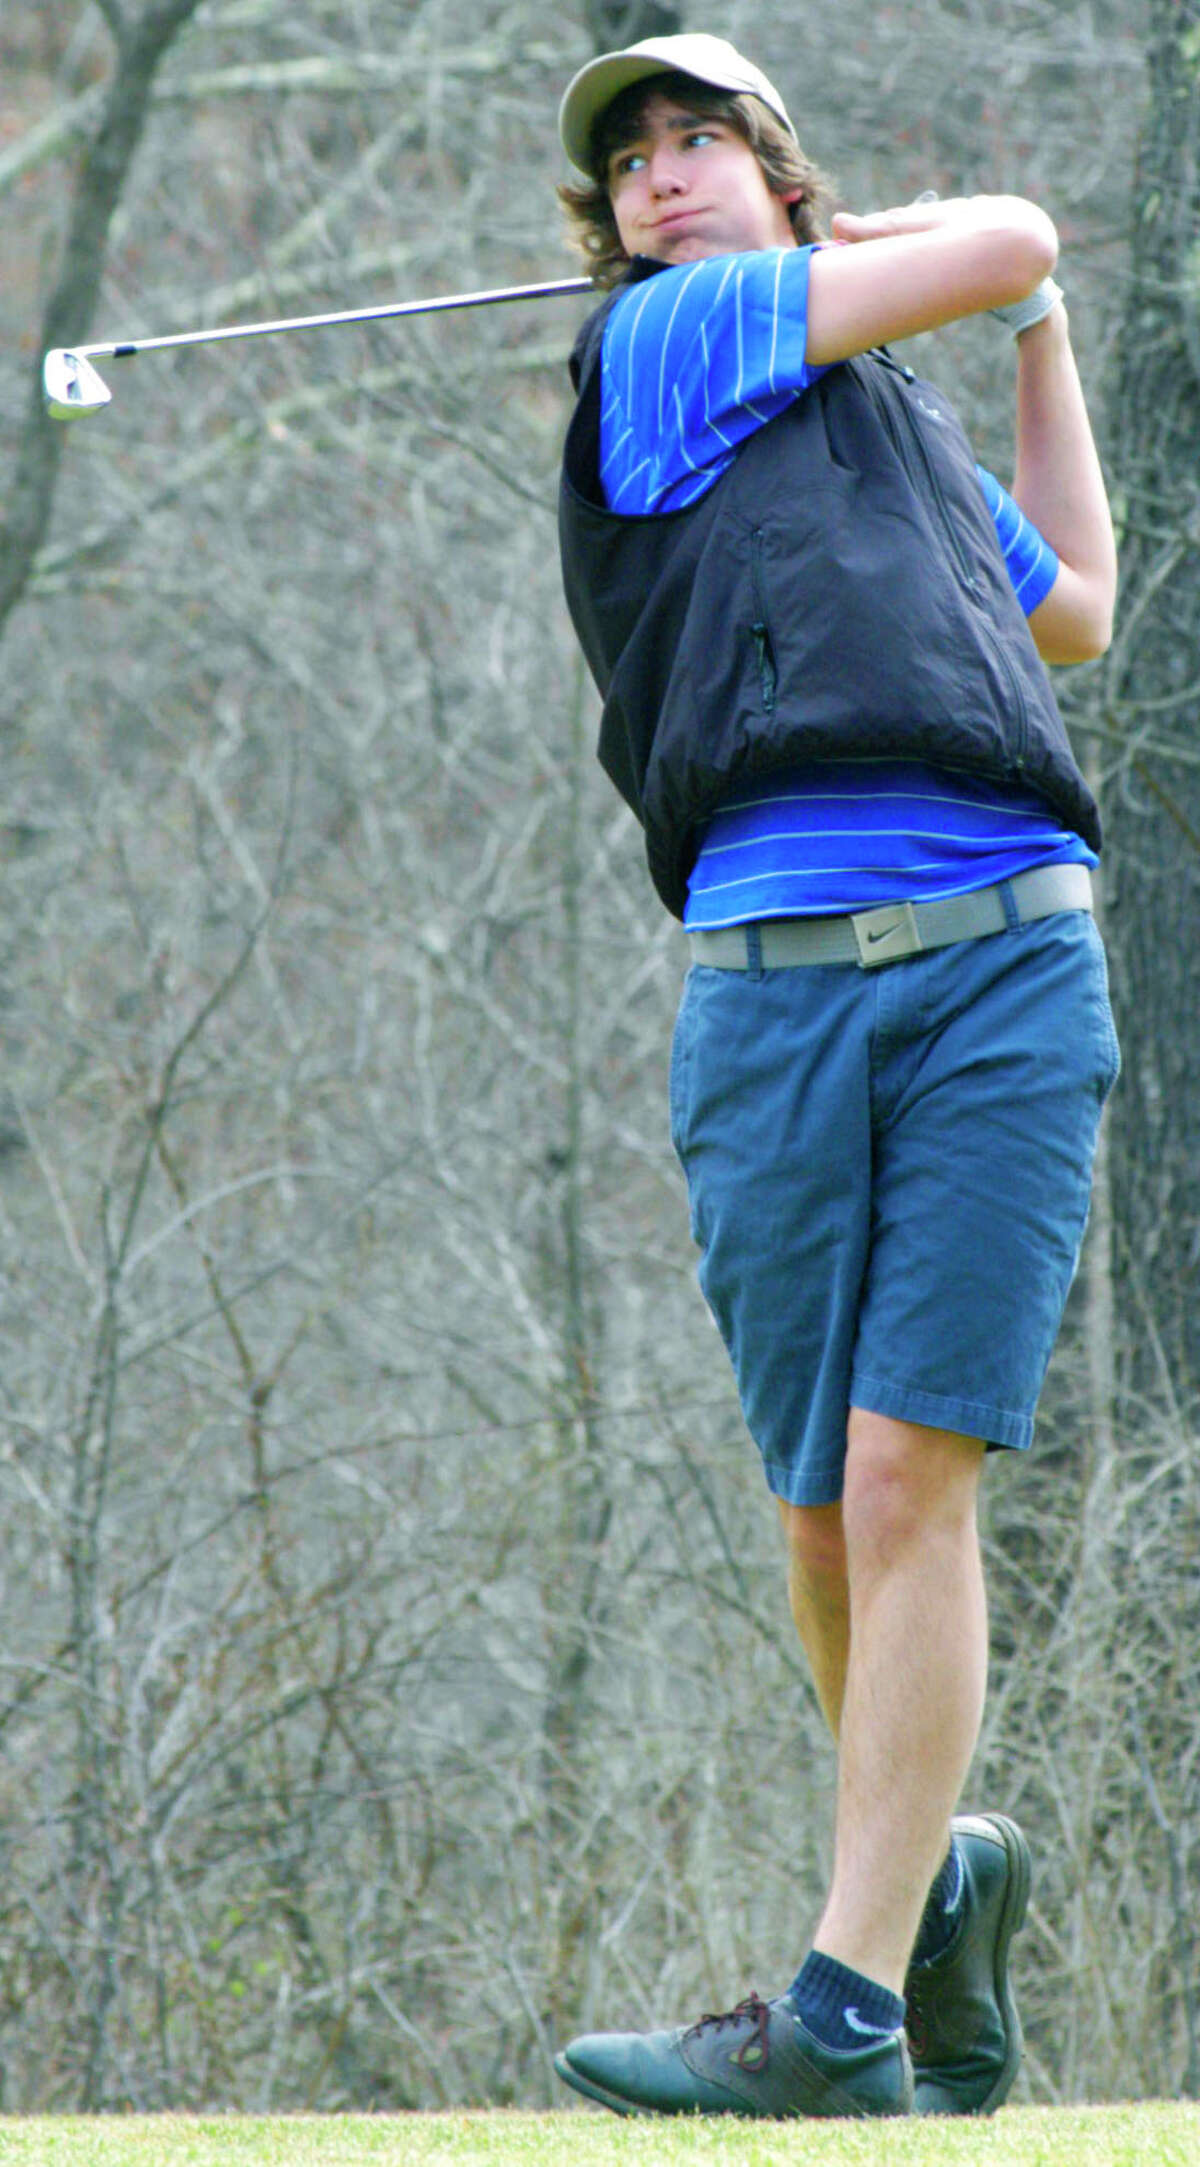 Rob McCarthy of the Spartans crafts his tee shot off the elevated 2nd tee at Washington Club during pre-season practice for Shepaug Valley High School golf. April 2014